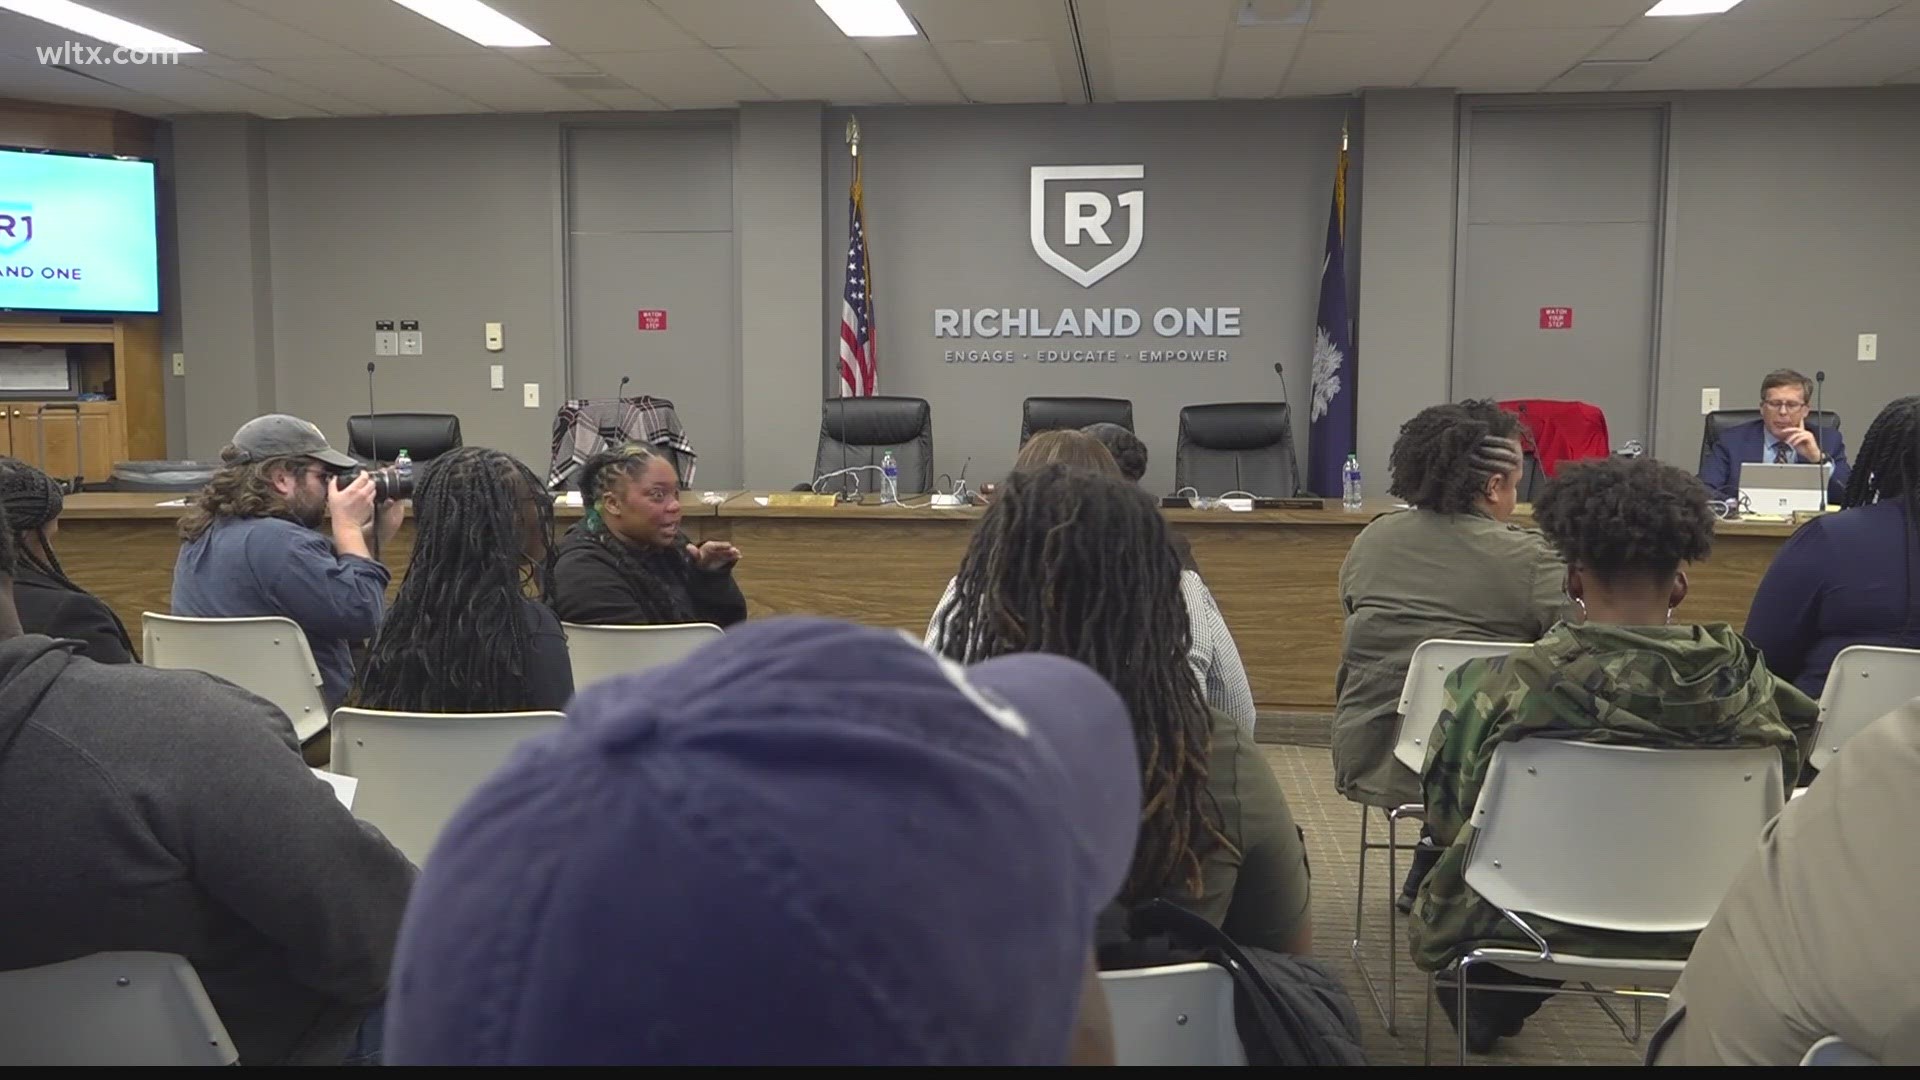 Parents took to social media to voice their growing concerns while the Richland One school board looks to address the problem.